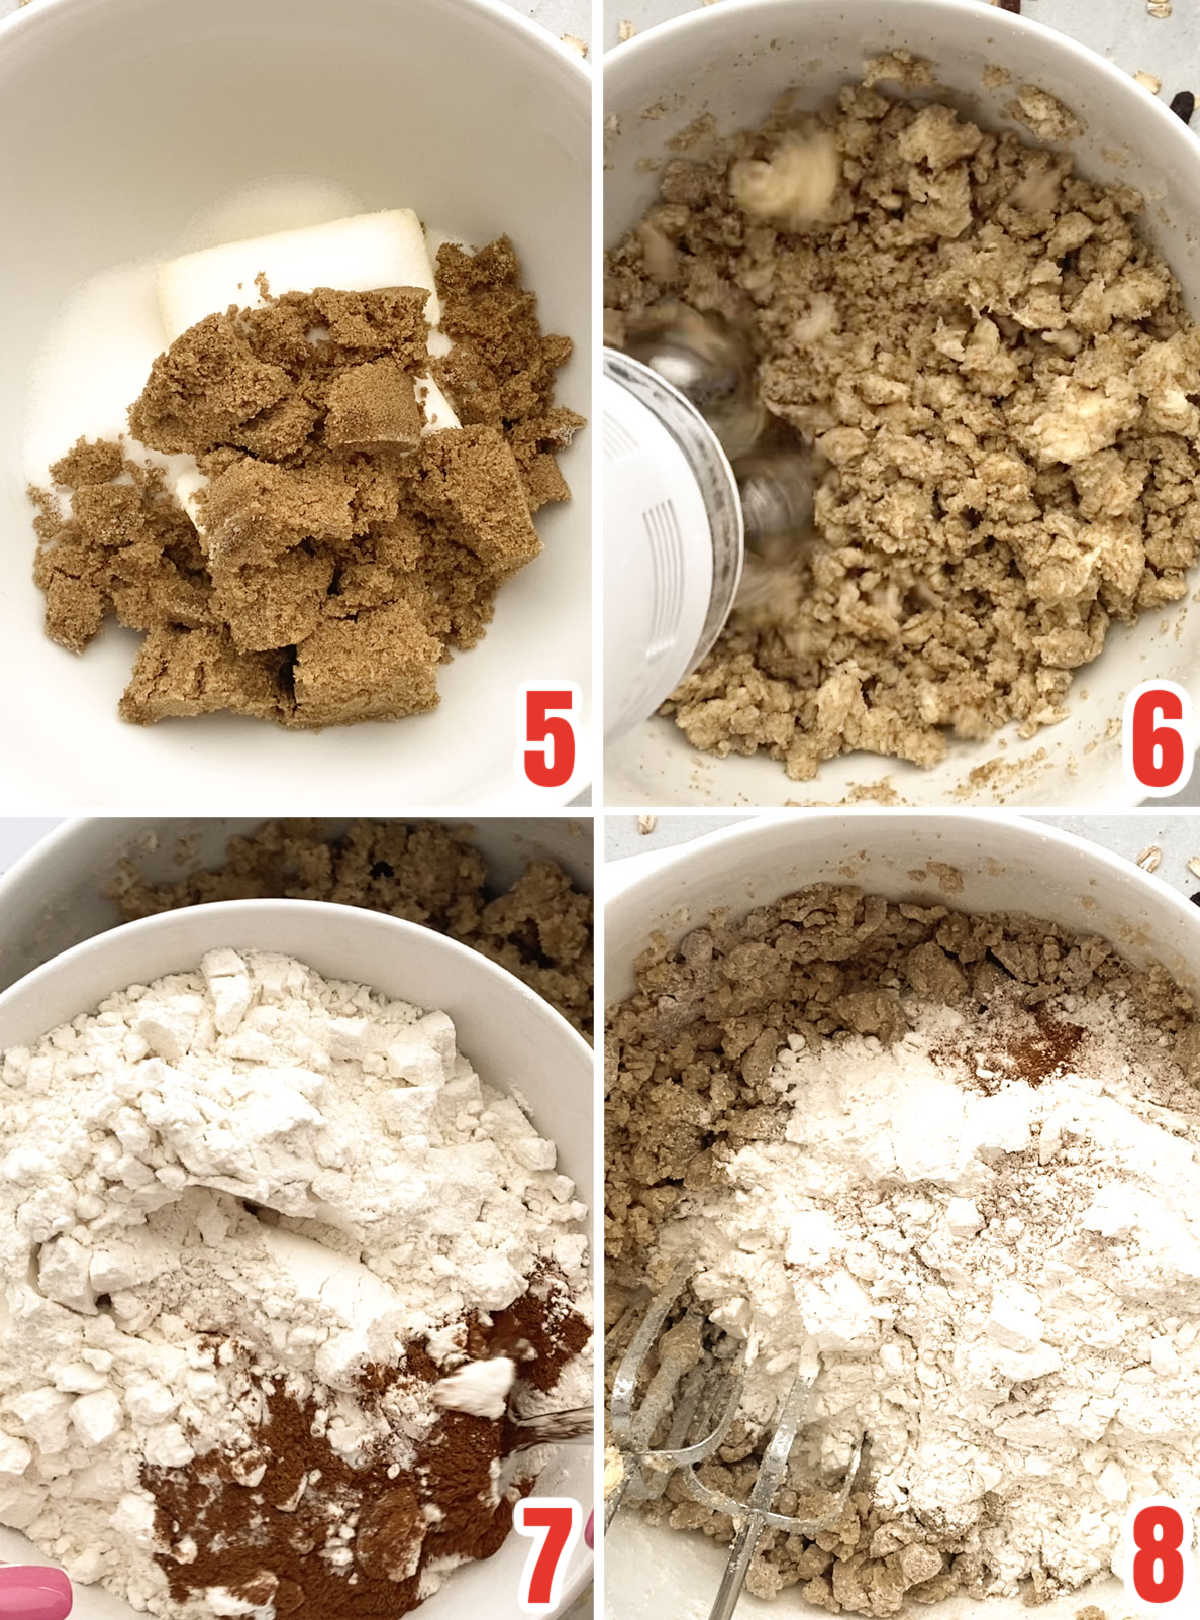 Collage image showing how to make the cookie dough for the Oatmeal Raisin Cookies.